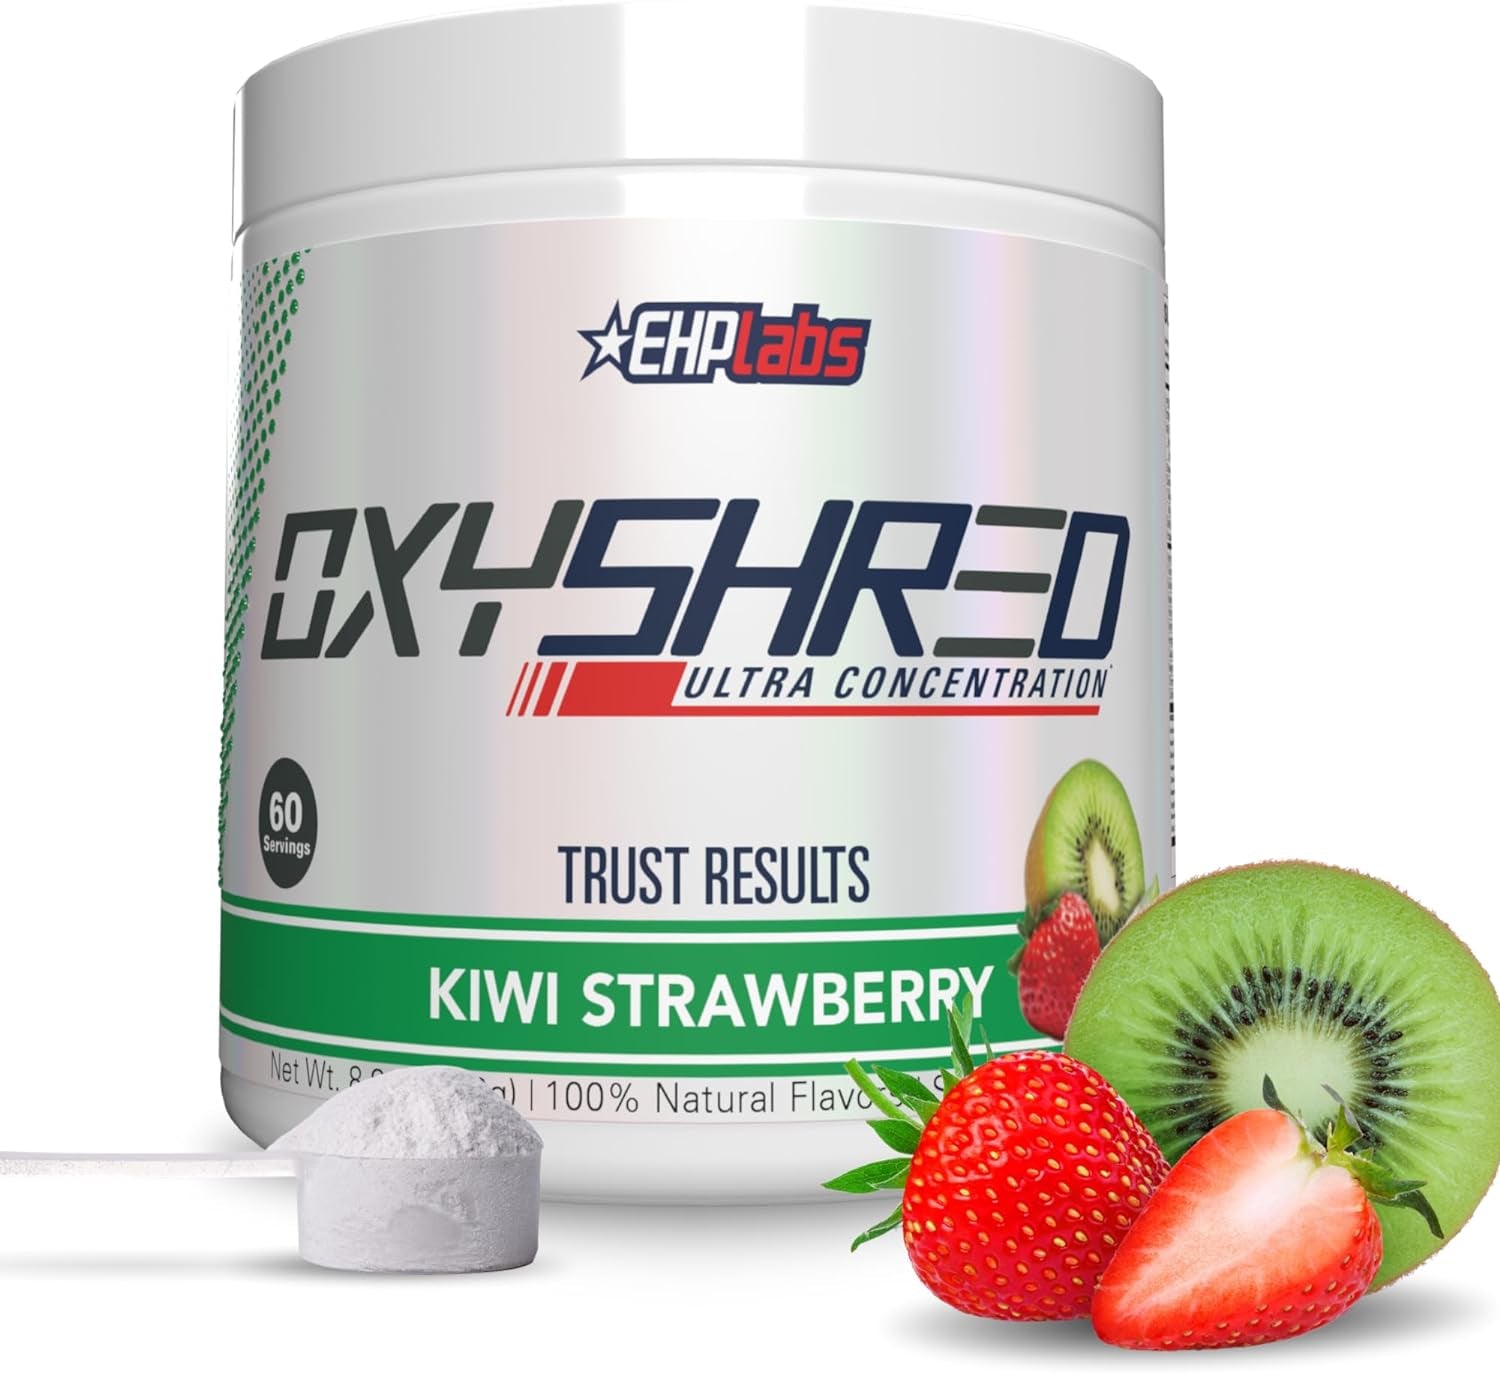 Ehplabs Oxyshred Ultra Concentration Shredding Supplement - Clinically Proven Pre Workout Powder with L Glutamine & Acetyl L Carnitine, Energy Boost Drink - Kiwi Strawberry, 60 Servings